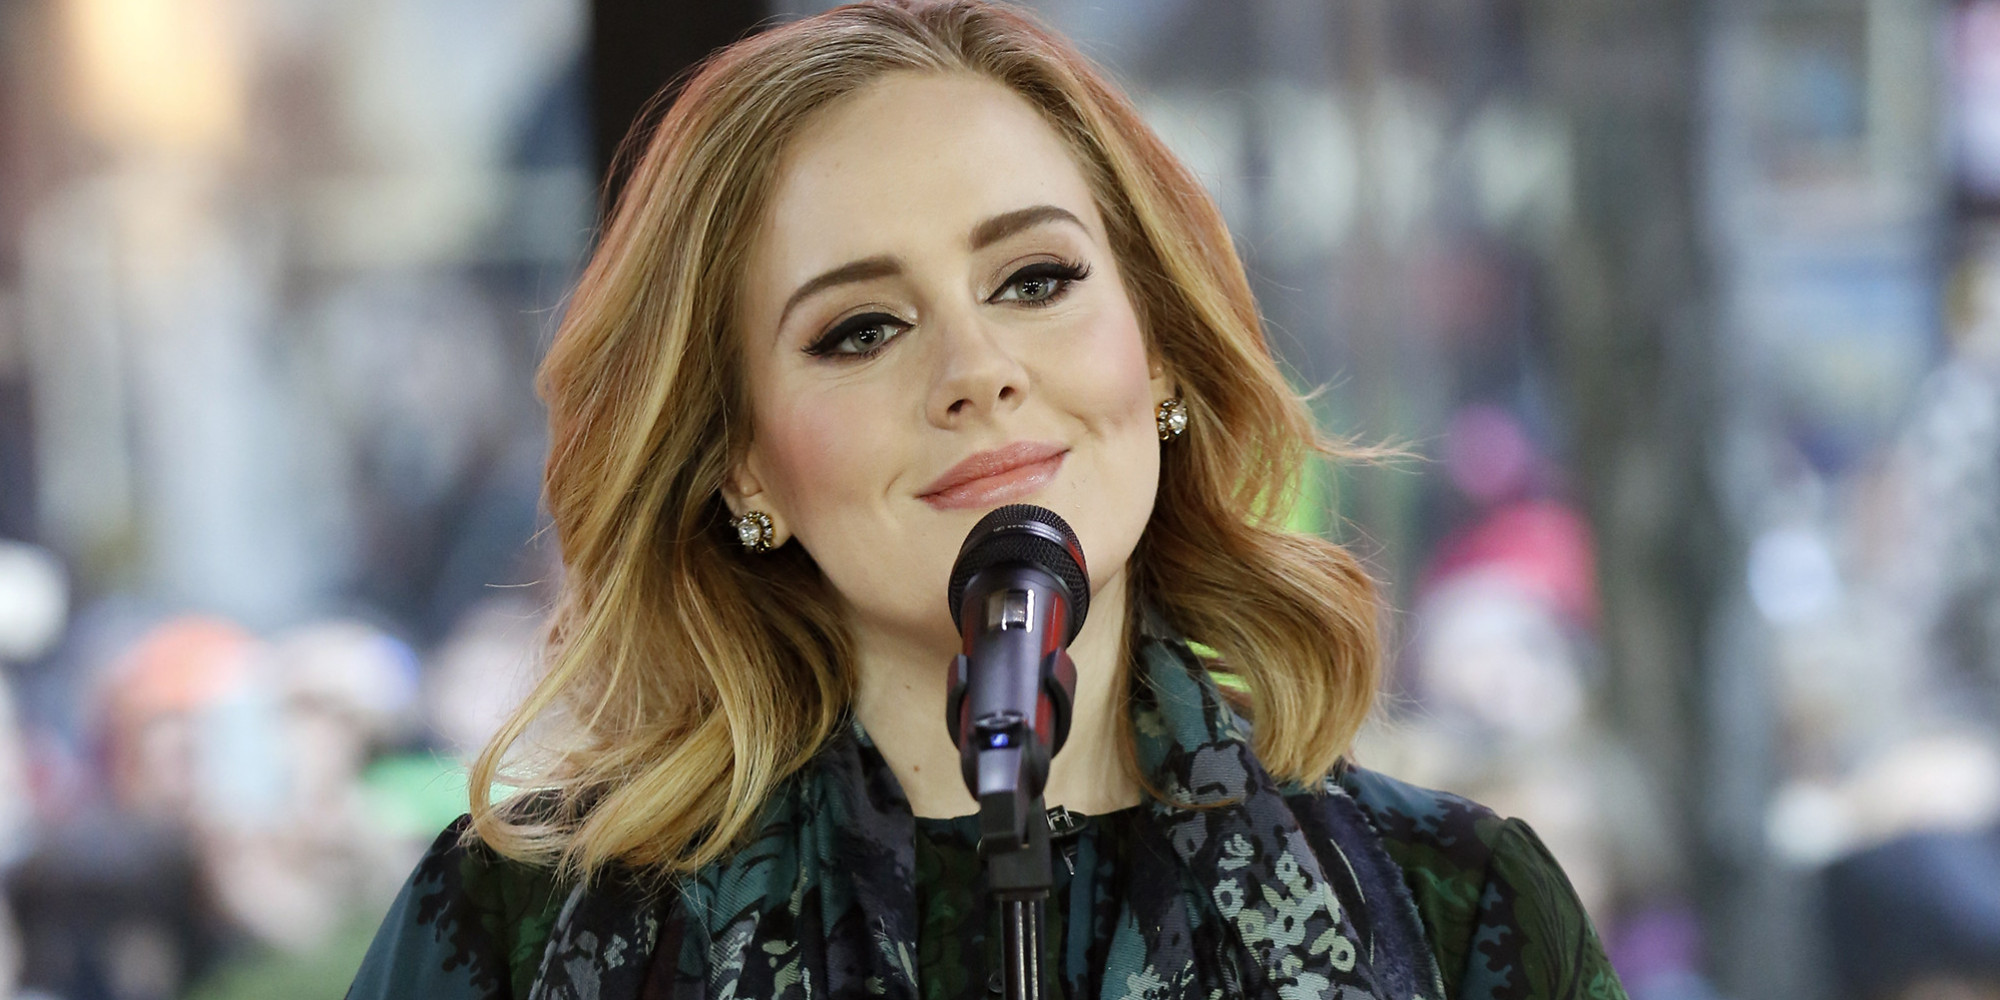 TODAY -- Pictured: Adele performs on the "Today" show on Wednesday, November 25, 2015 -- (Photo by: Heidi Gutman/NBC/NBC NewsWire via Getty Images)